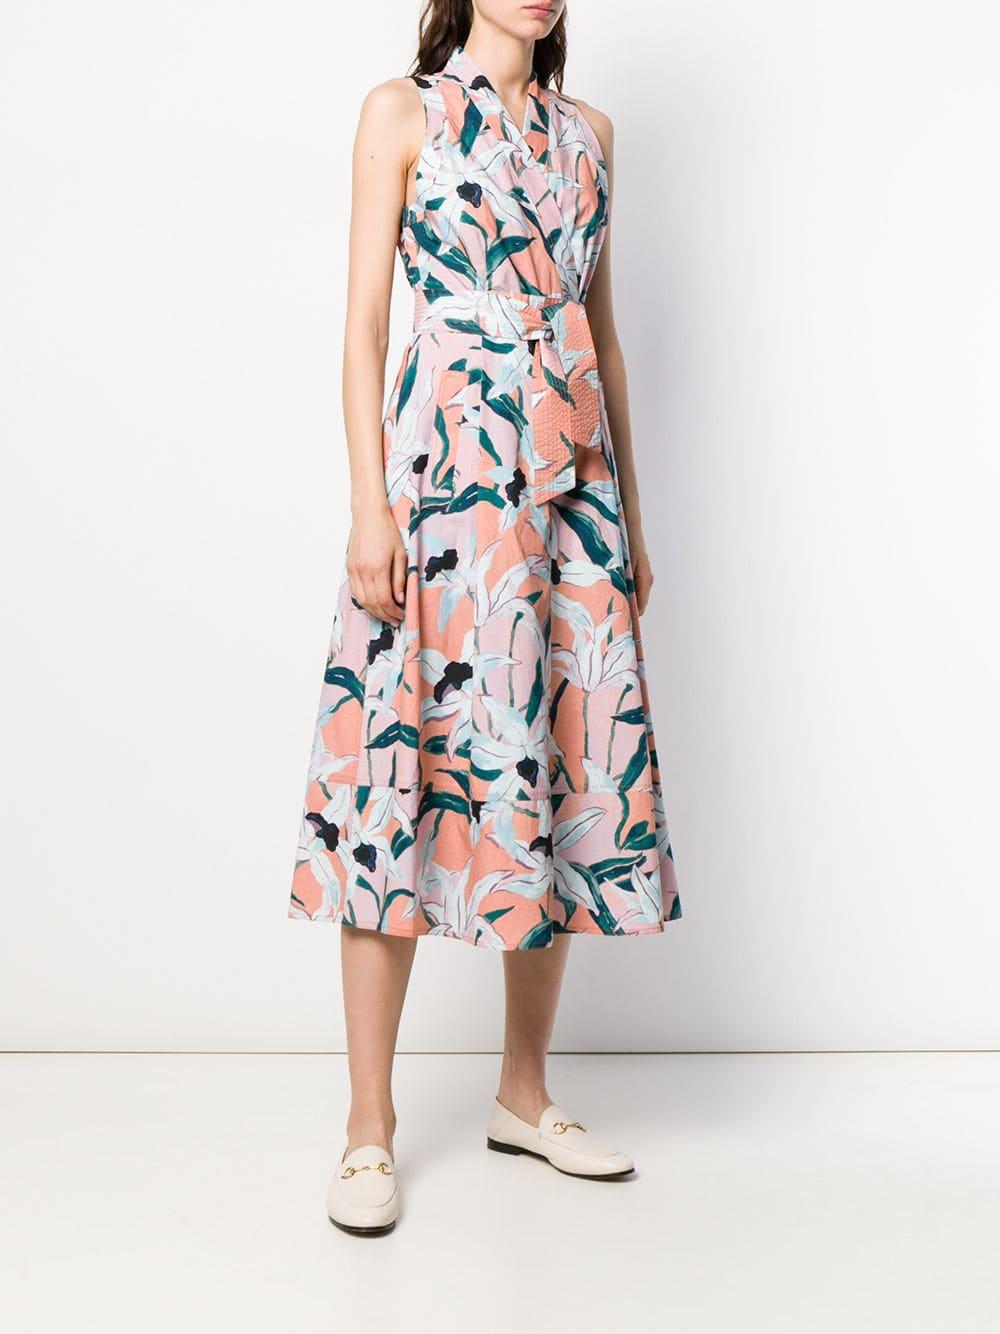 Tory Burch Cotton Floral Print Midi Dress in Pink - Lyst